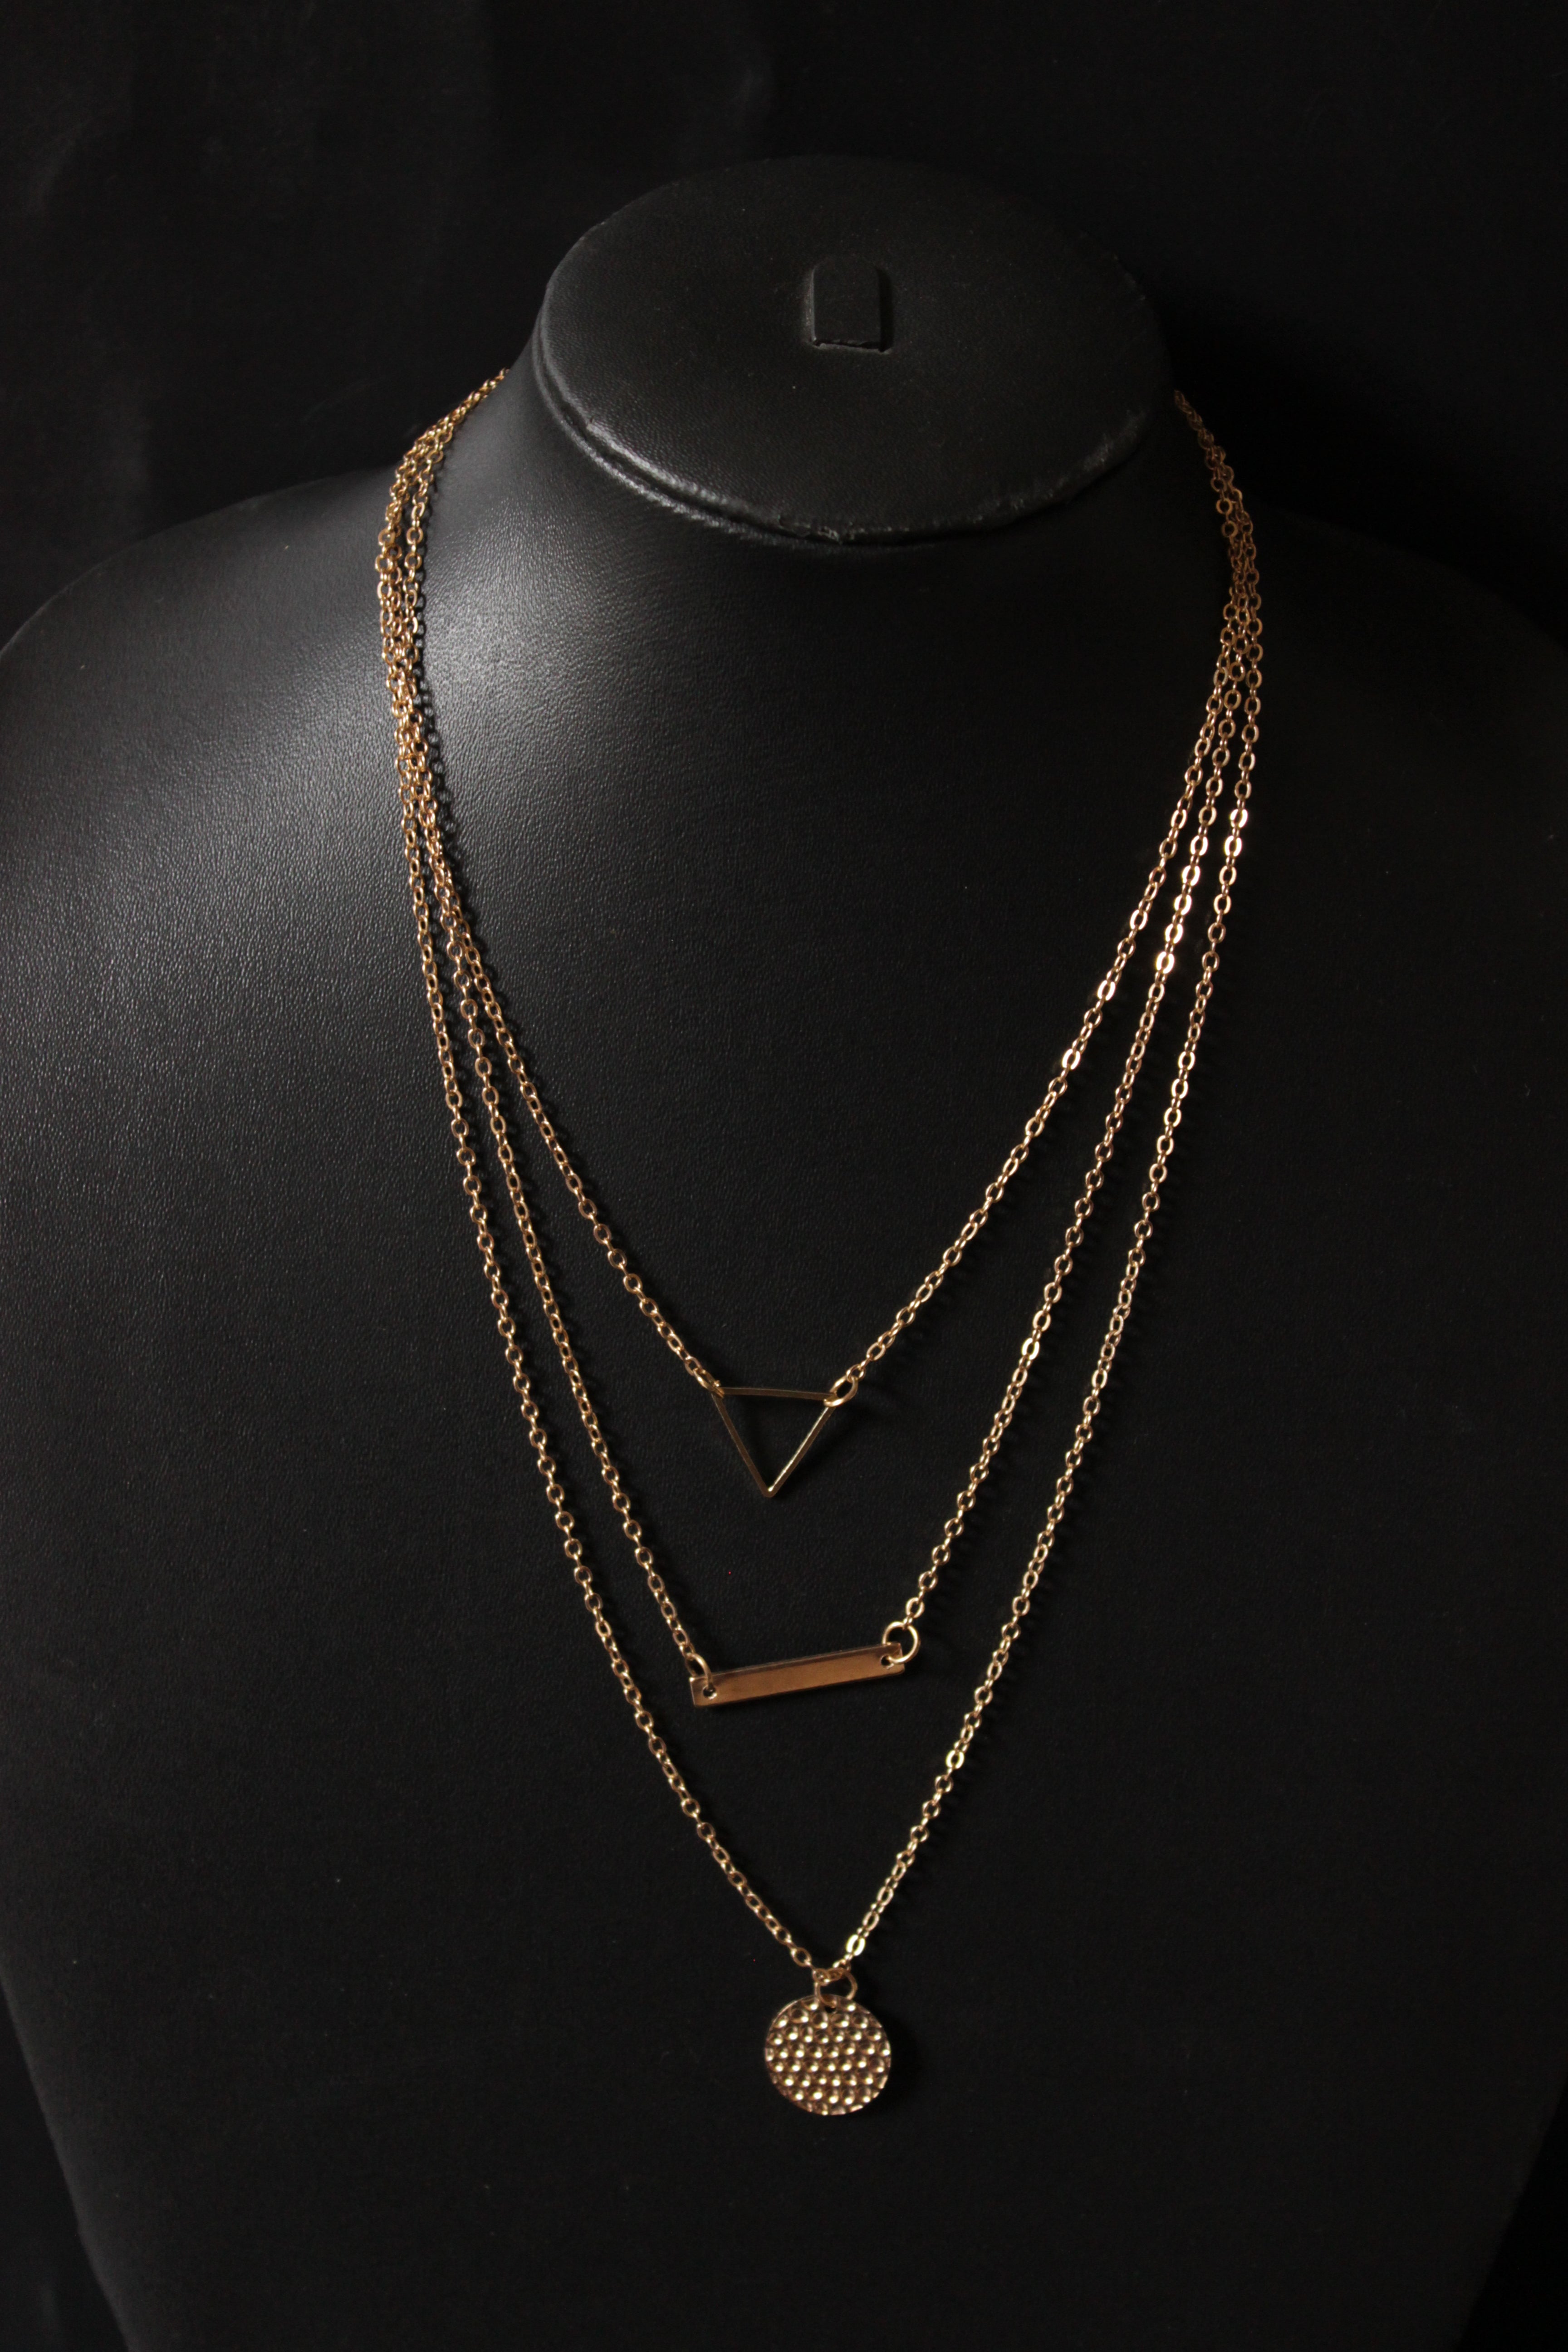 3 Layered Gold Plated Geometric Shapes Necklace